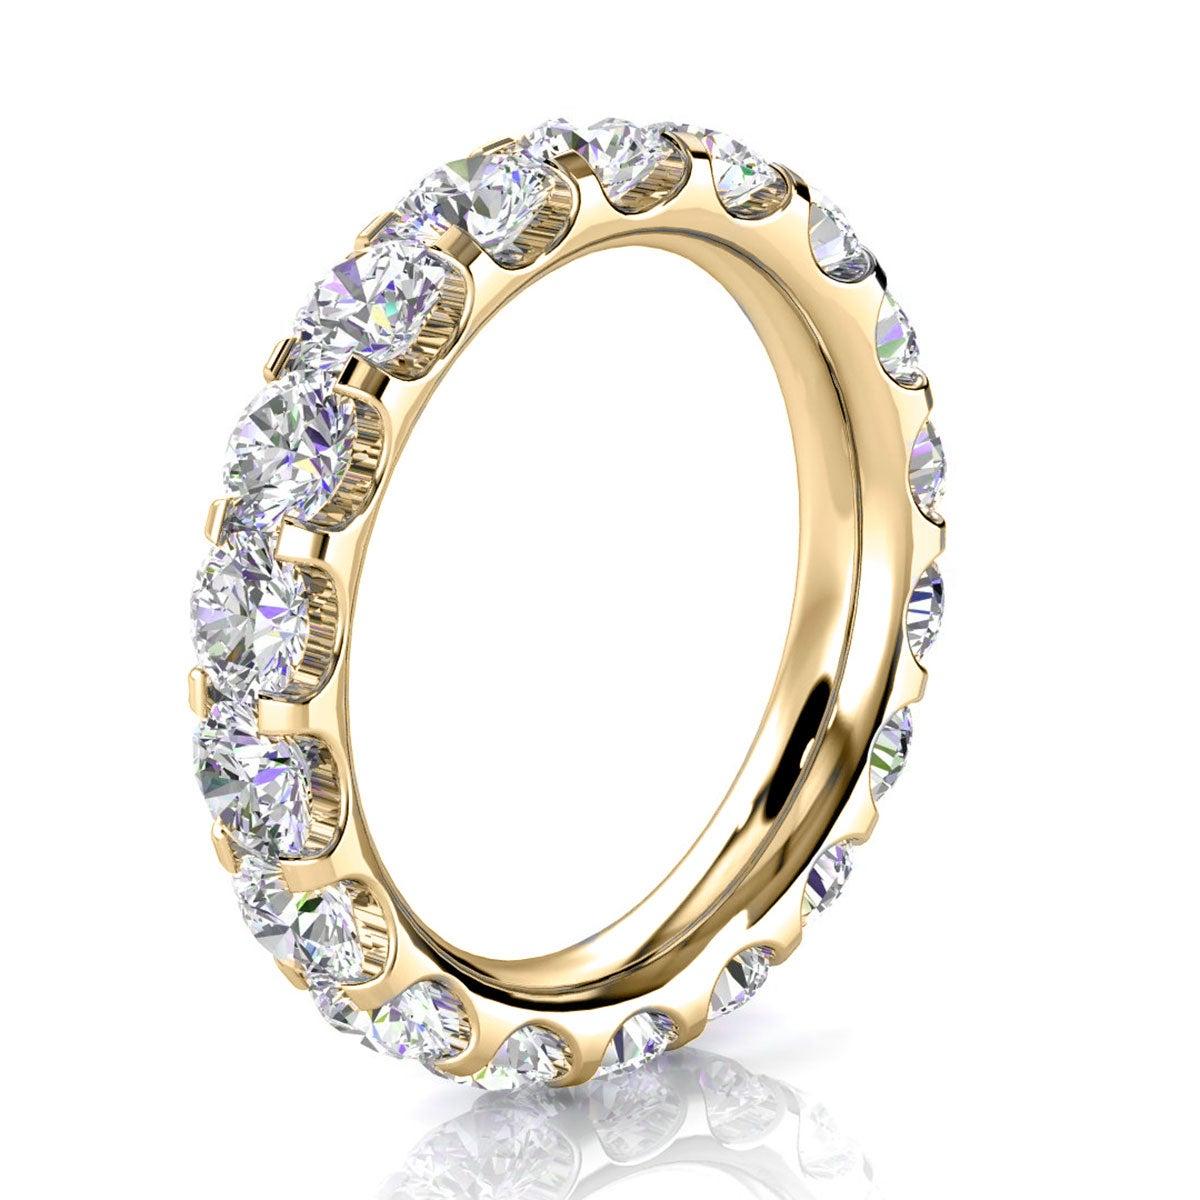 For Sale:  14k Yellow Gold Viola Eternity Micro-Prong Diamond Ring '3 Ct. Tw' 2